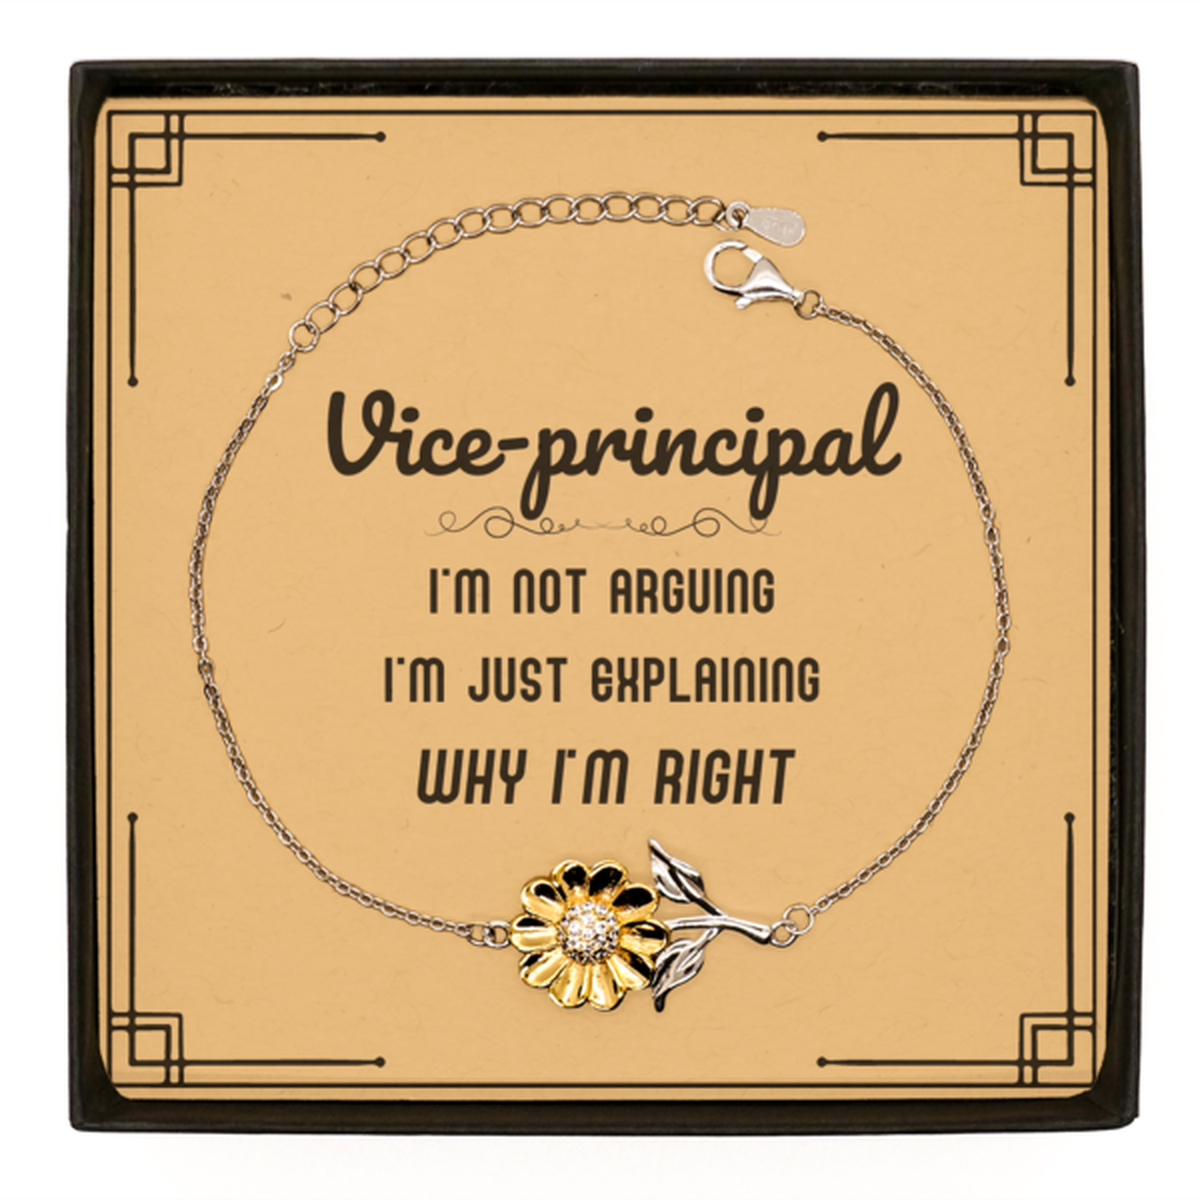 Vice-principal I'm not Arguing. I'm Just Explaining Why I'm RIGHT Sunflower Bracelet, Funny Saying Quote Vice-principal Gifts For Vice-principal Message Card Graduation Birthday Christmas Gifts for Men Women Coworker